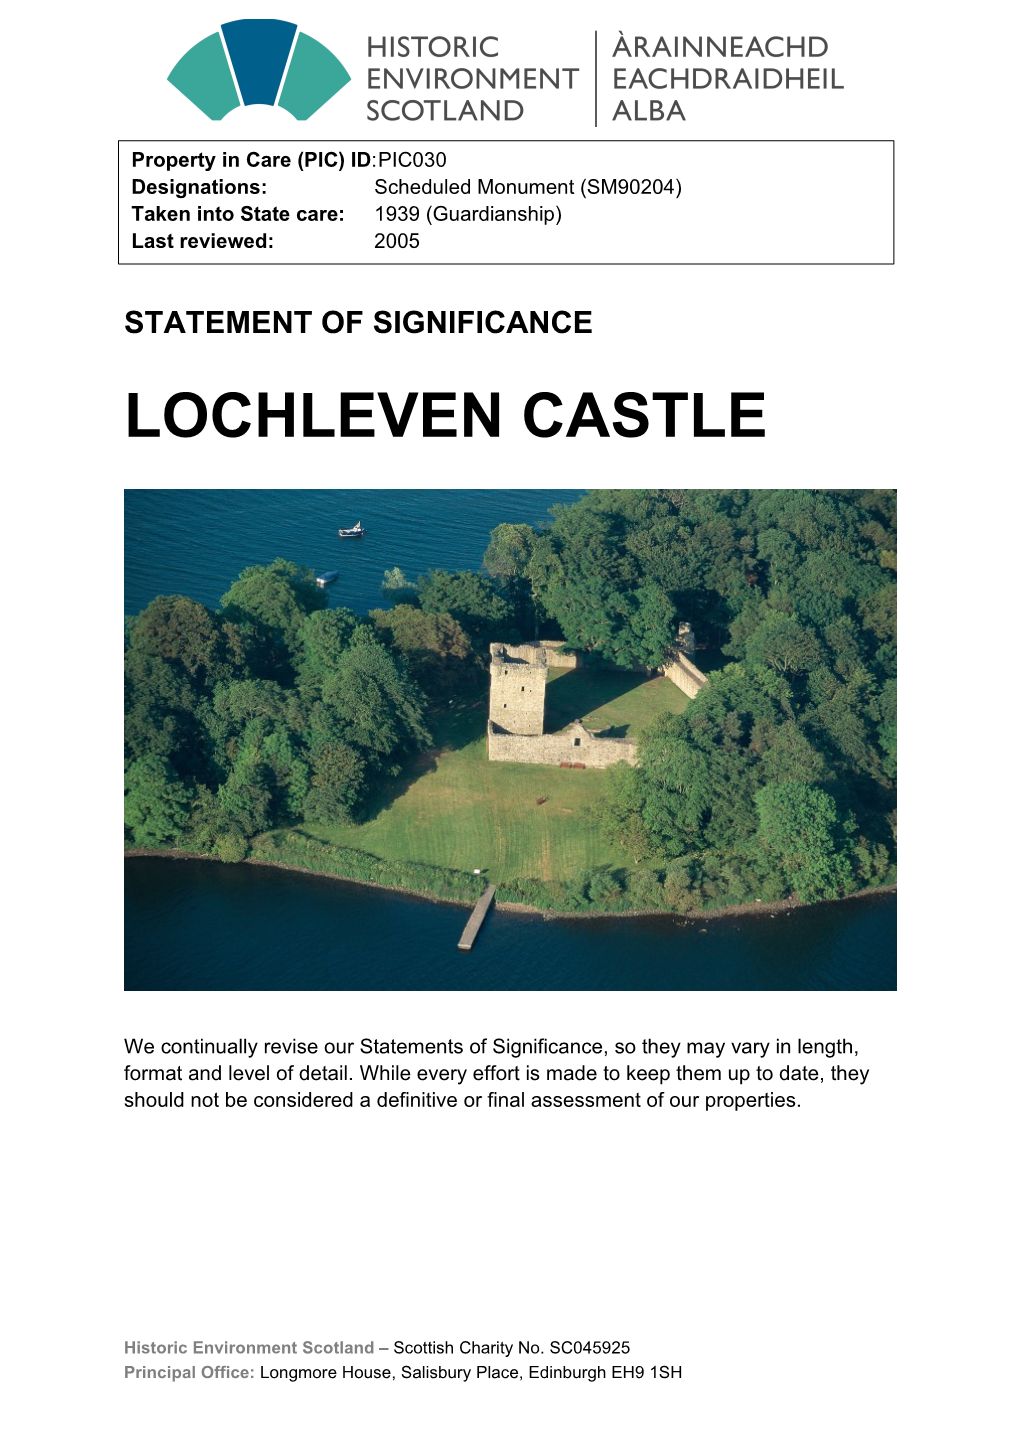 Lochleven Castle Statement of Significance